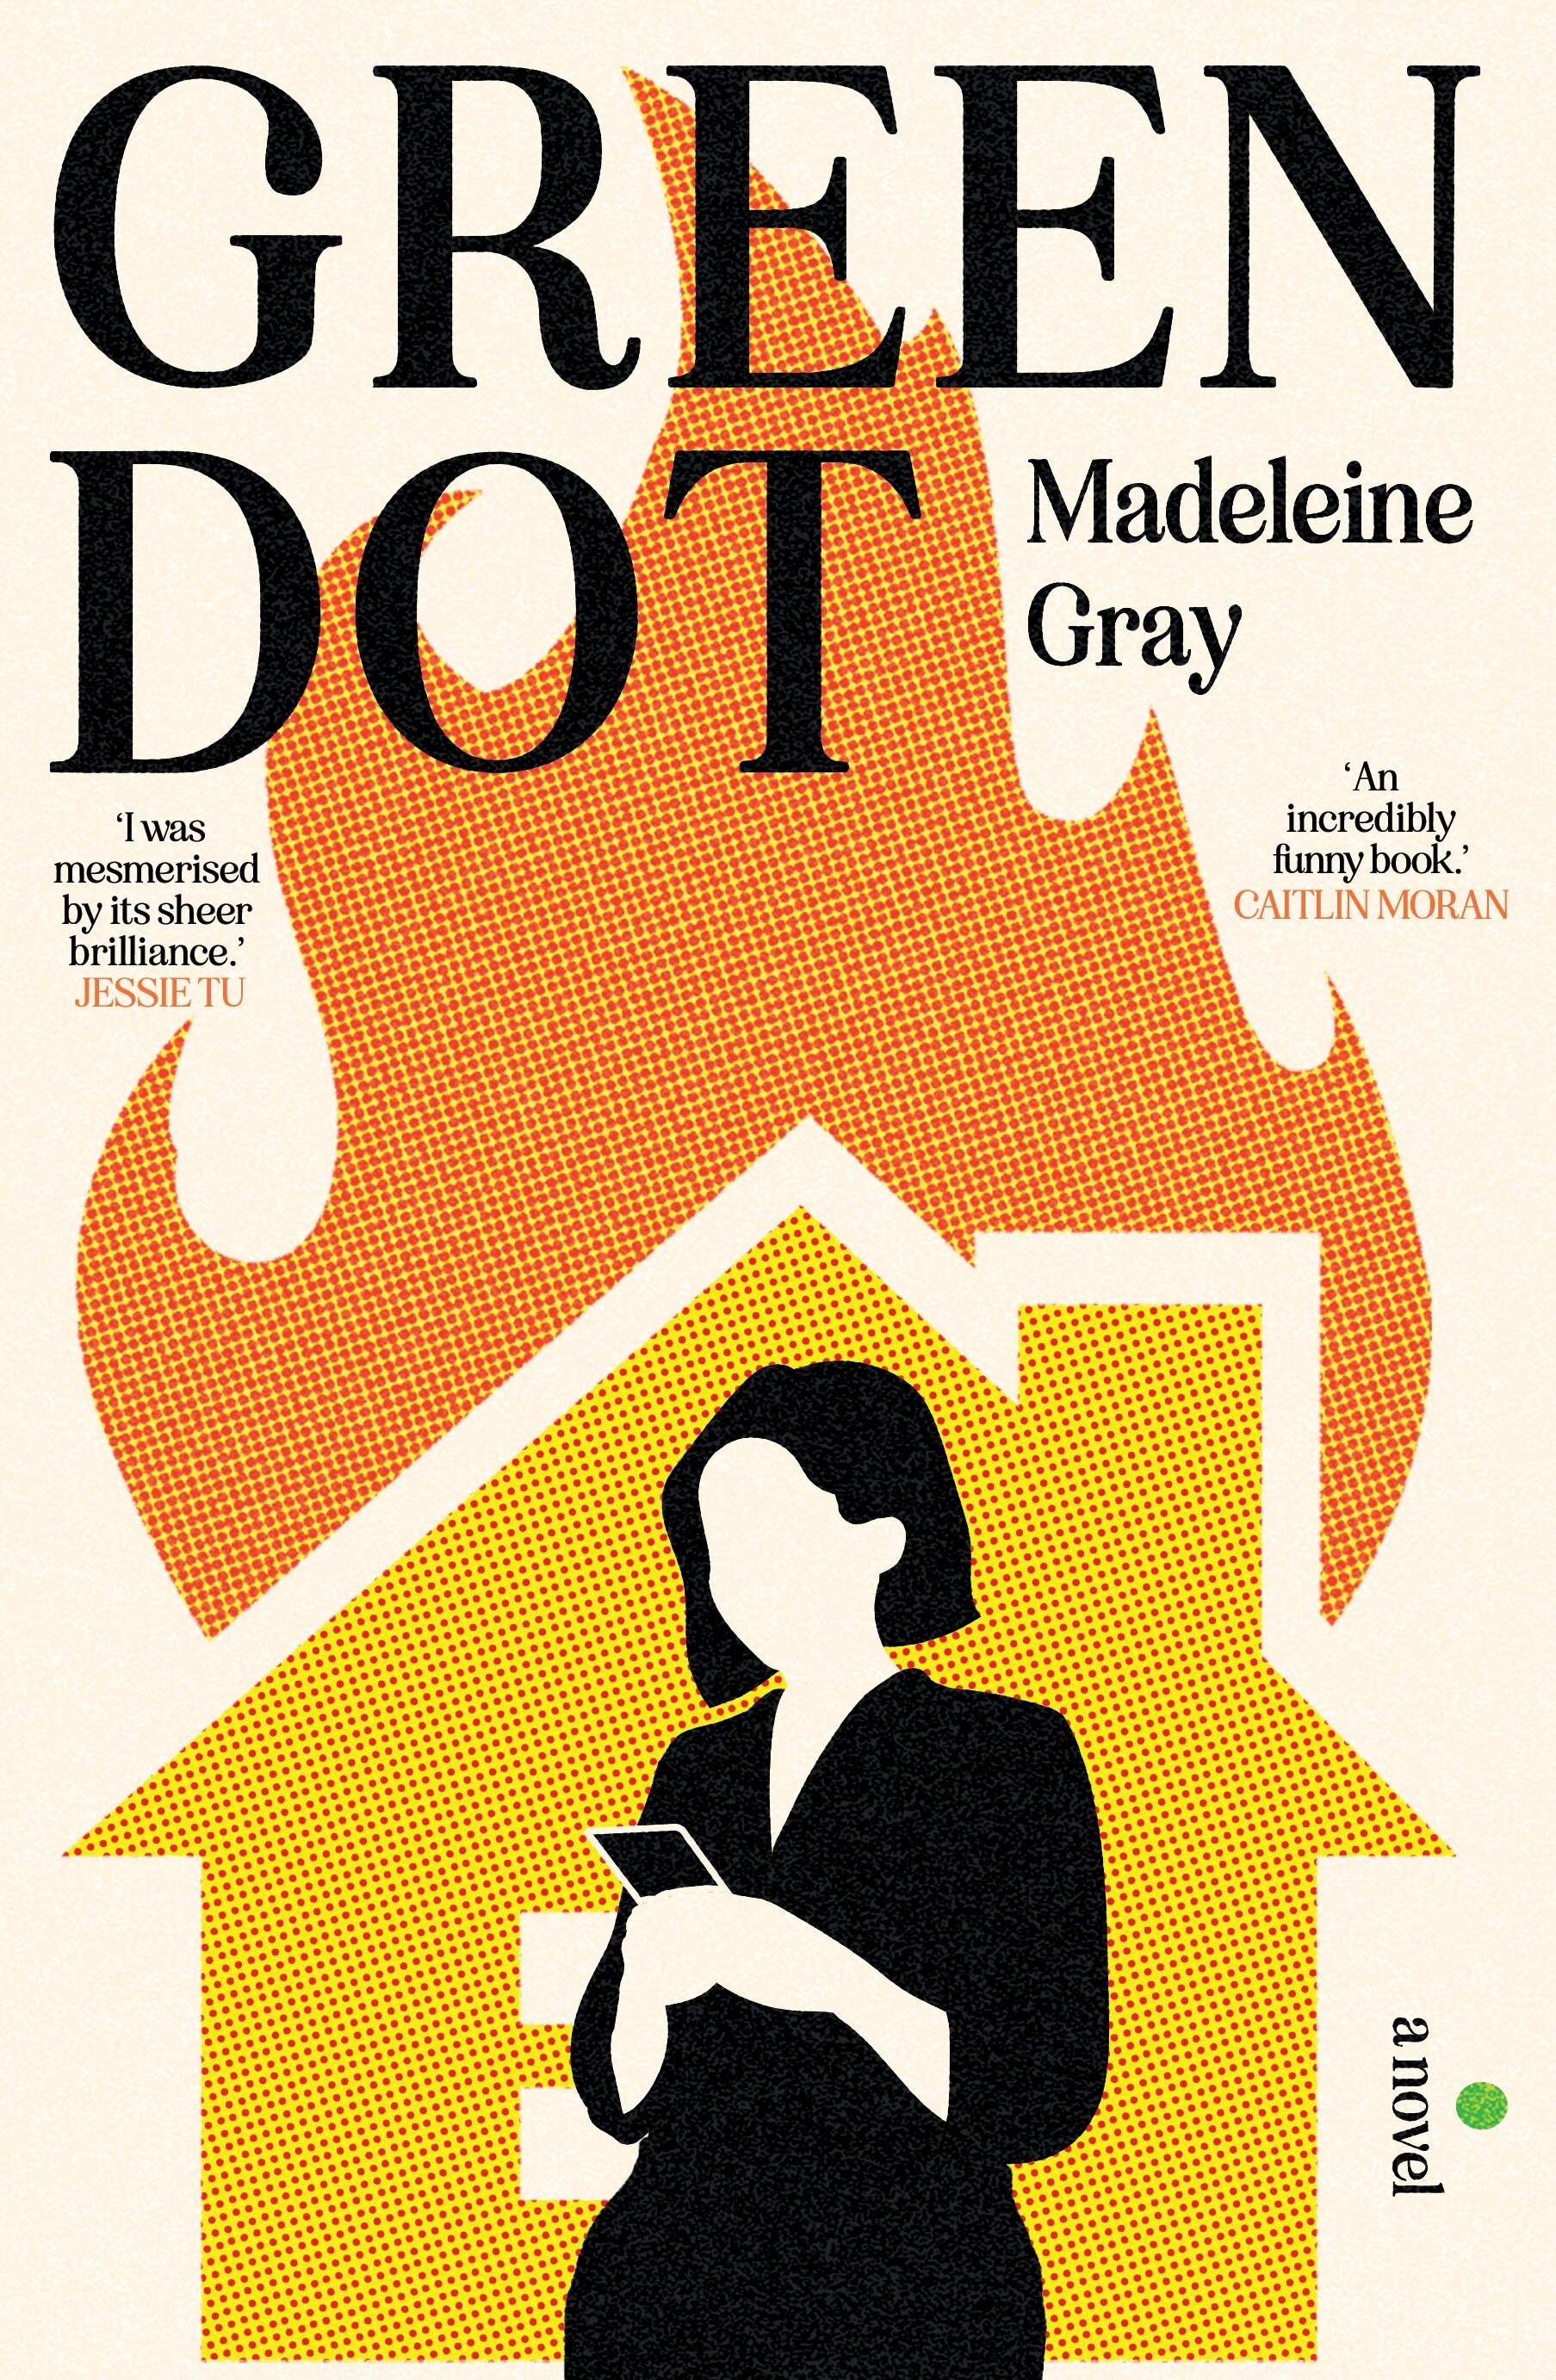 A book cover showing a stylised illustration of a young woman texting on a phone and a burning house behind her